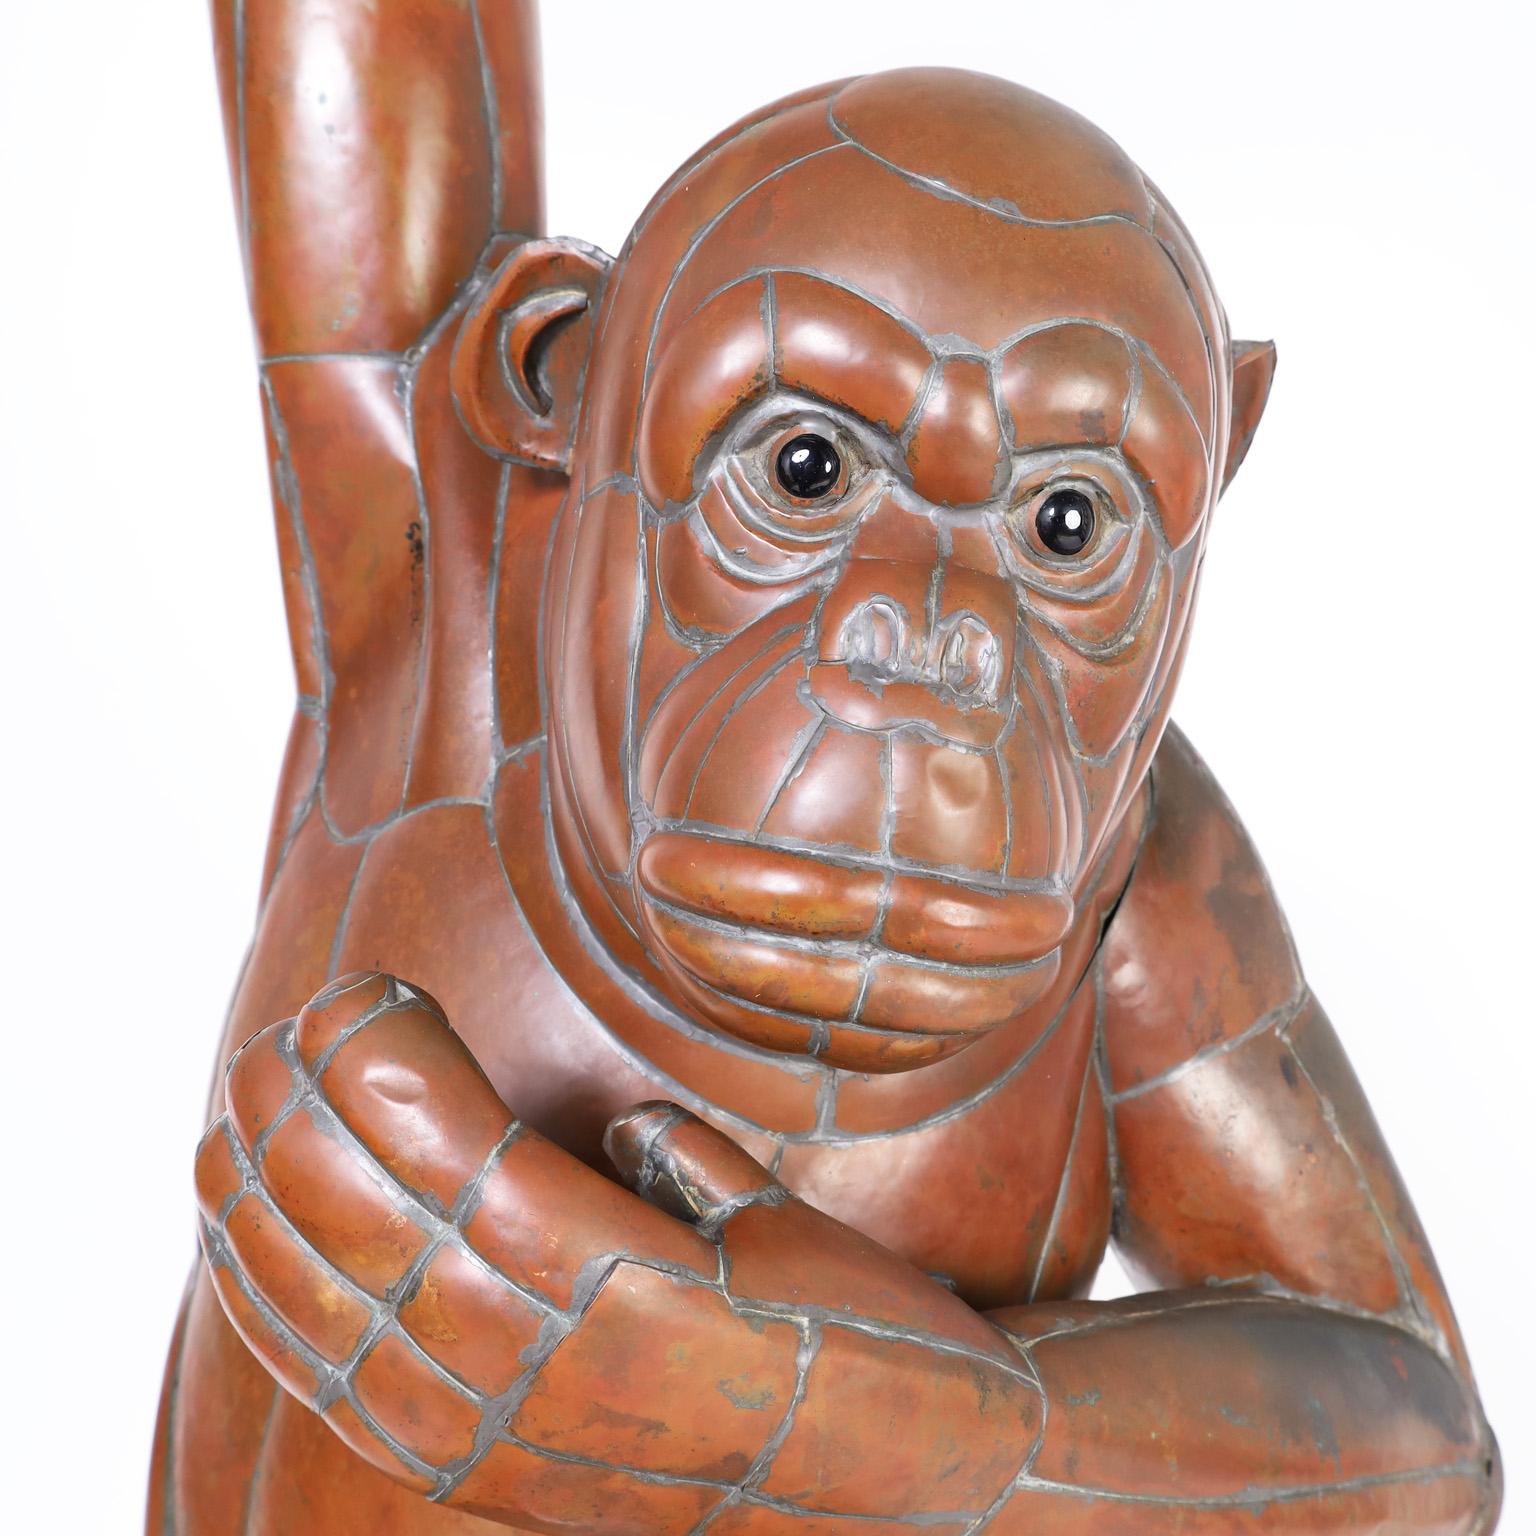 Hand-Crafted Mid Century Monkey or Chimpanzee Sculpture Signed Sergio Bustamante